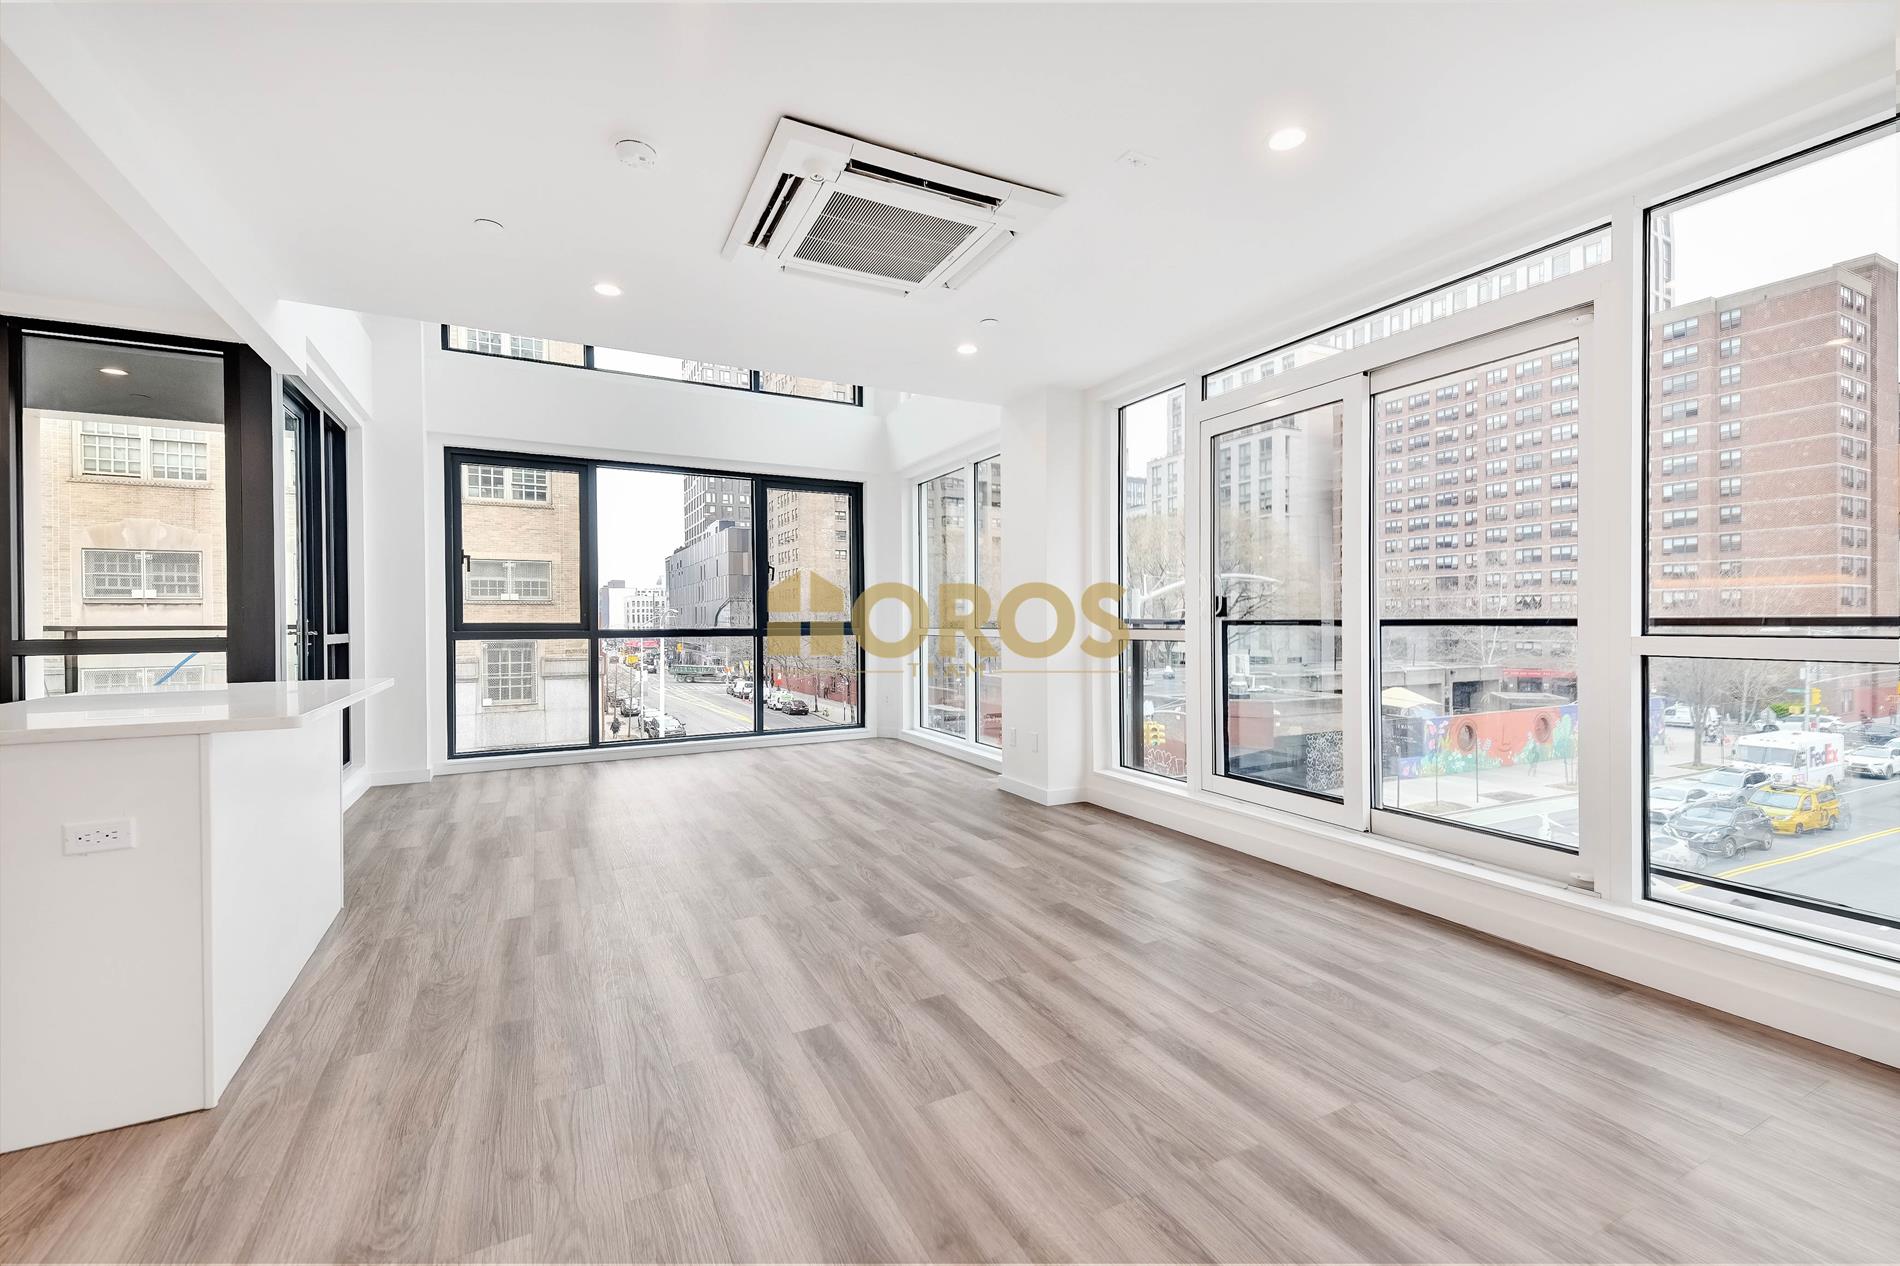 355 Grand Street 3, Chinatown, Downtown, NYC - 3 Bedrooms  
2.5 Bathrooms  
5 Rooms - 